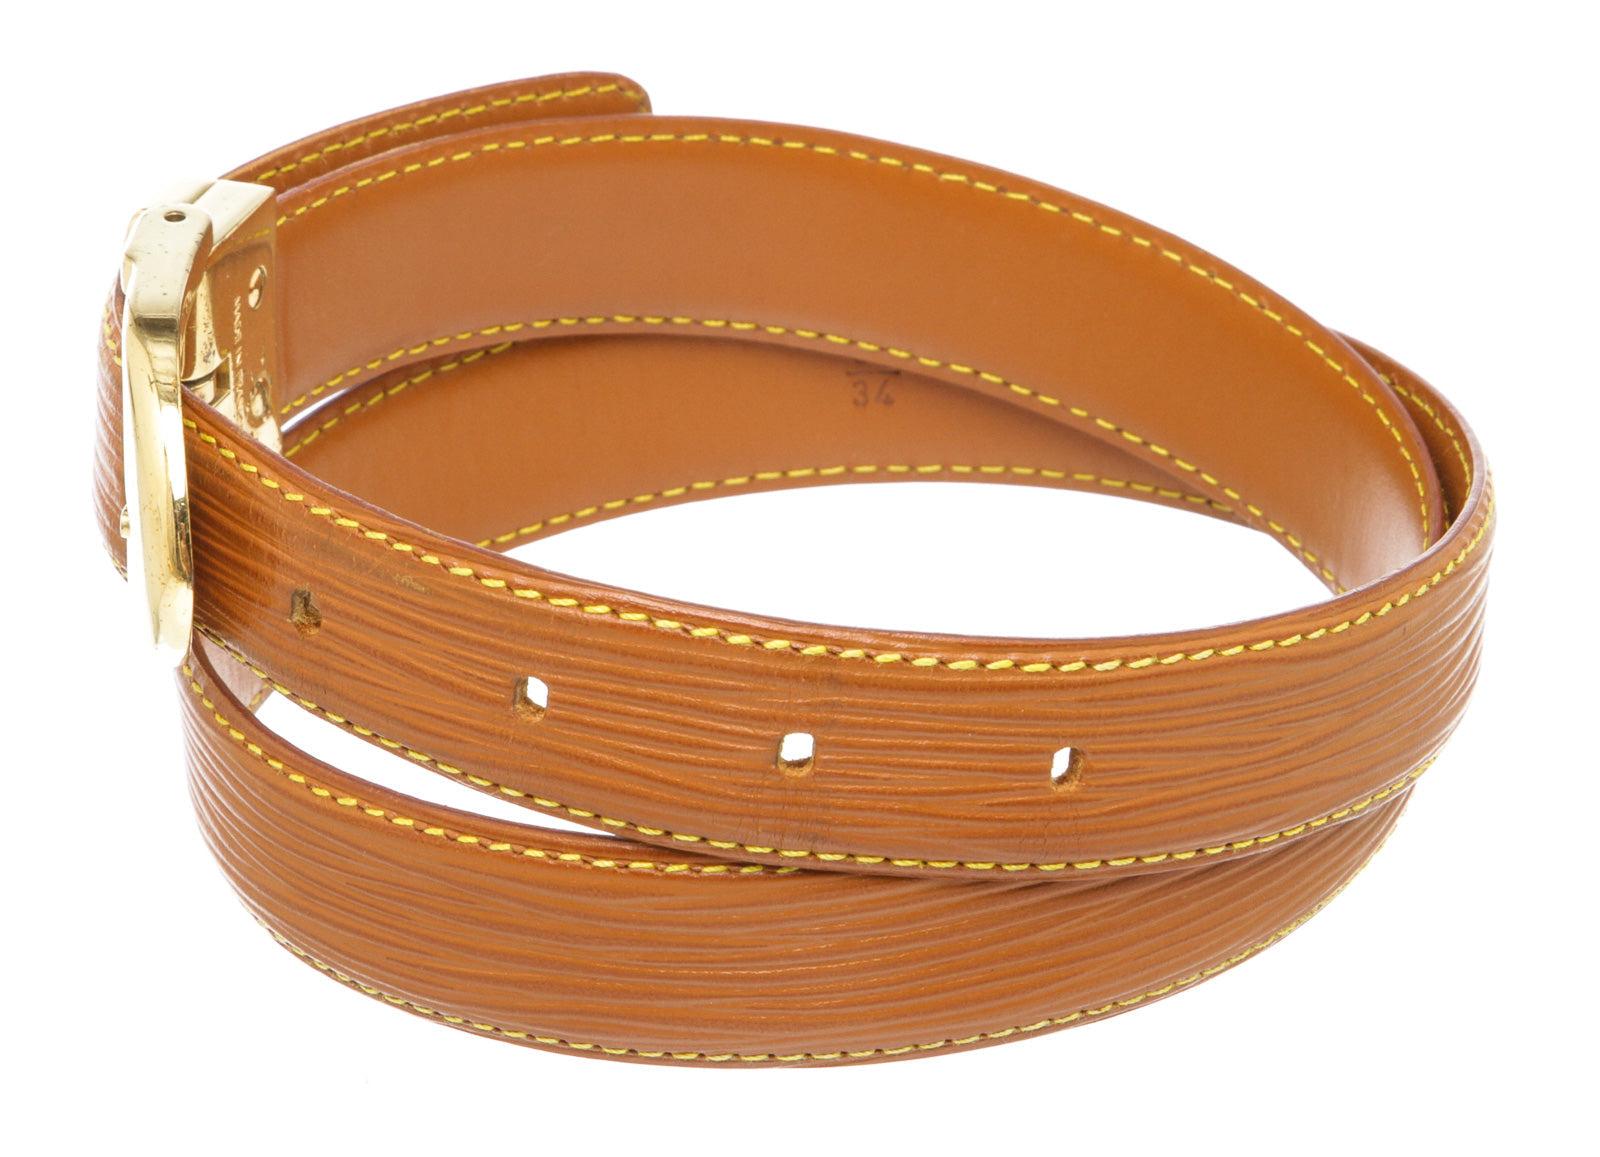 Brown Epi leather Louis Vuitton Epi Skinny Classique belt with gold-tone buckle  For Sale 1